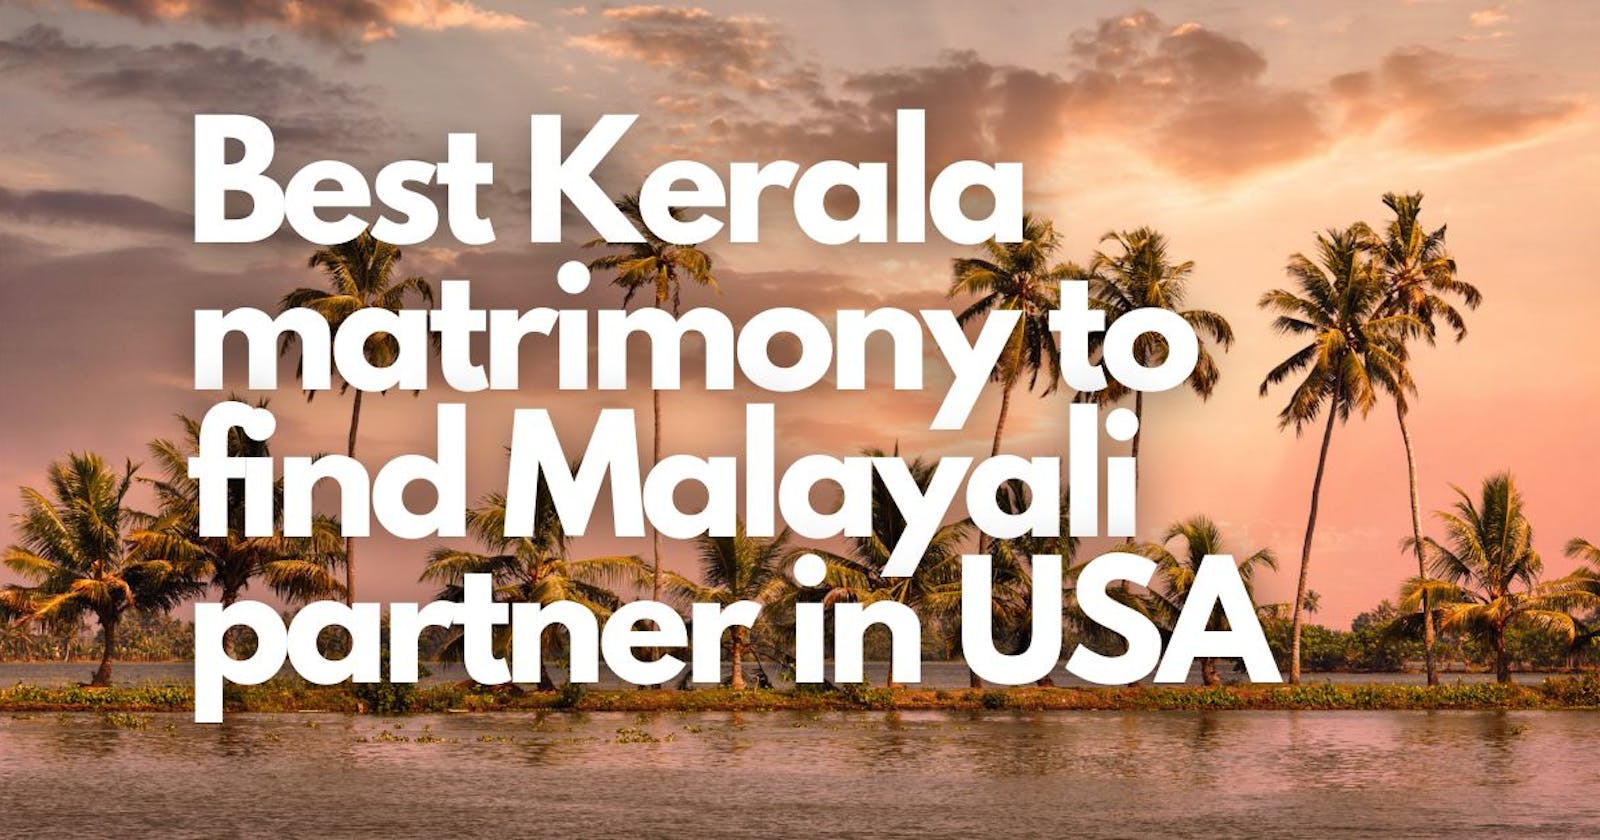 Which is the best Kerala matrimony to find Malayali partner in USA?